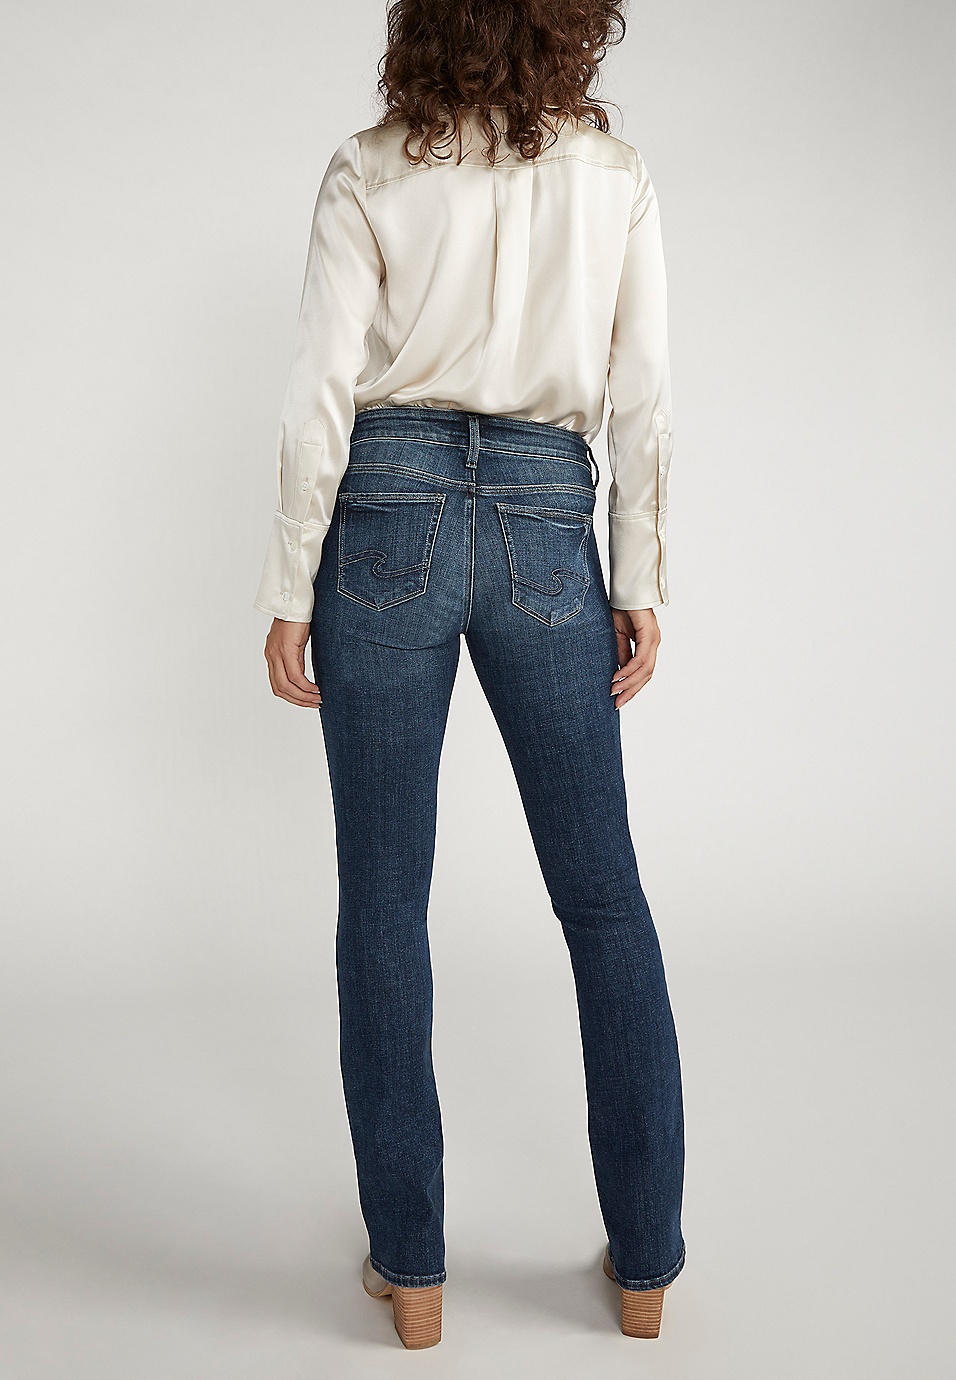 Buy Elyse Mid Rise Slim Bootcut Jeans for USD 94.00